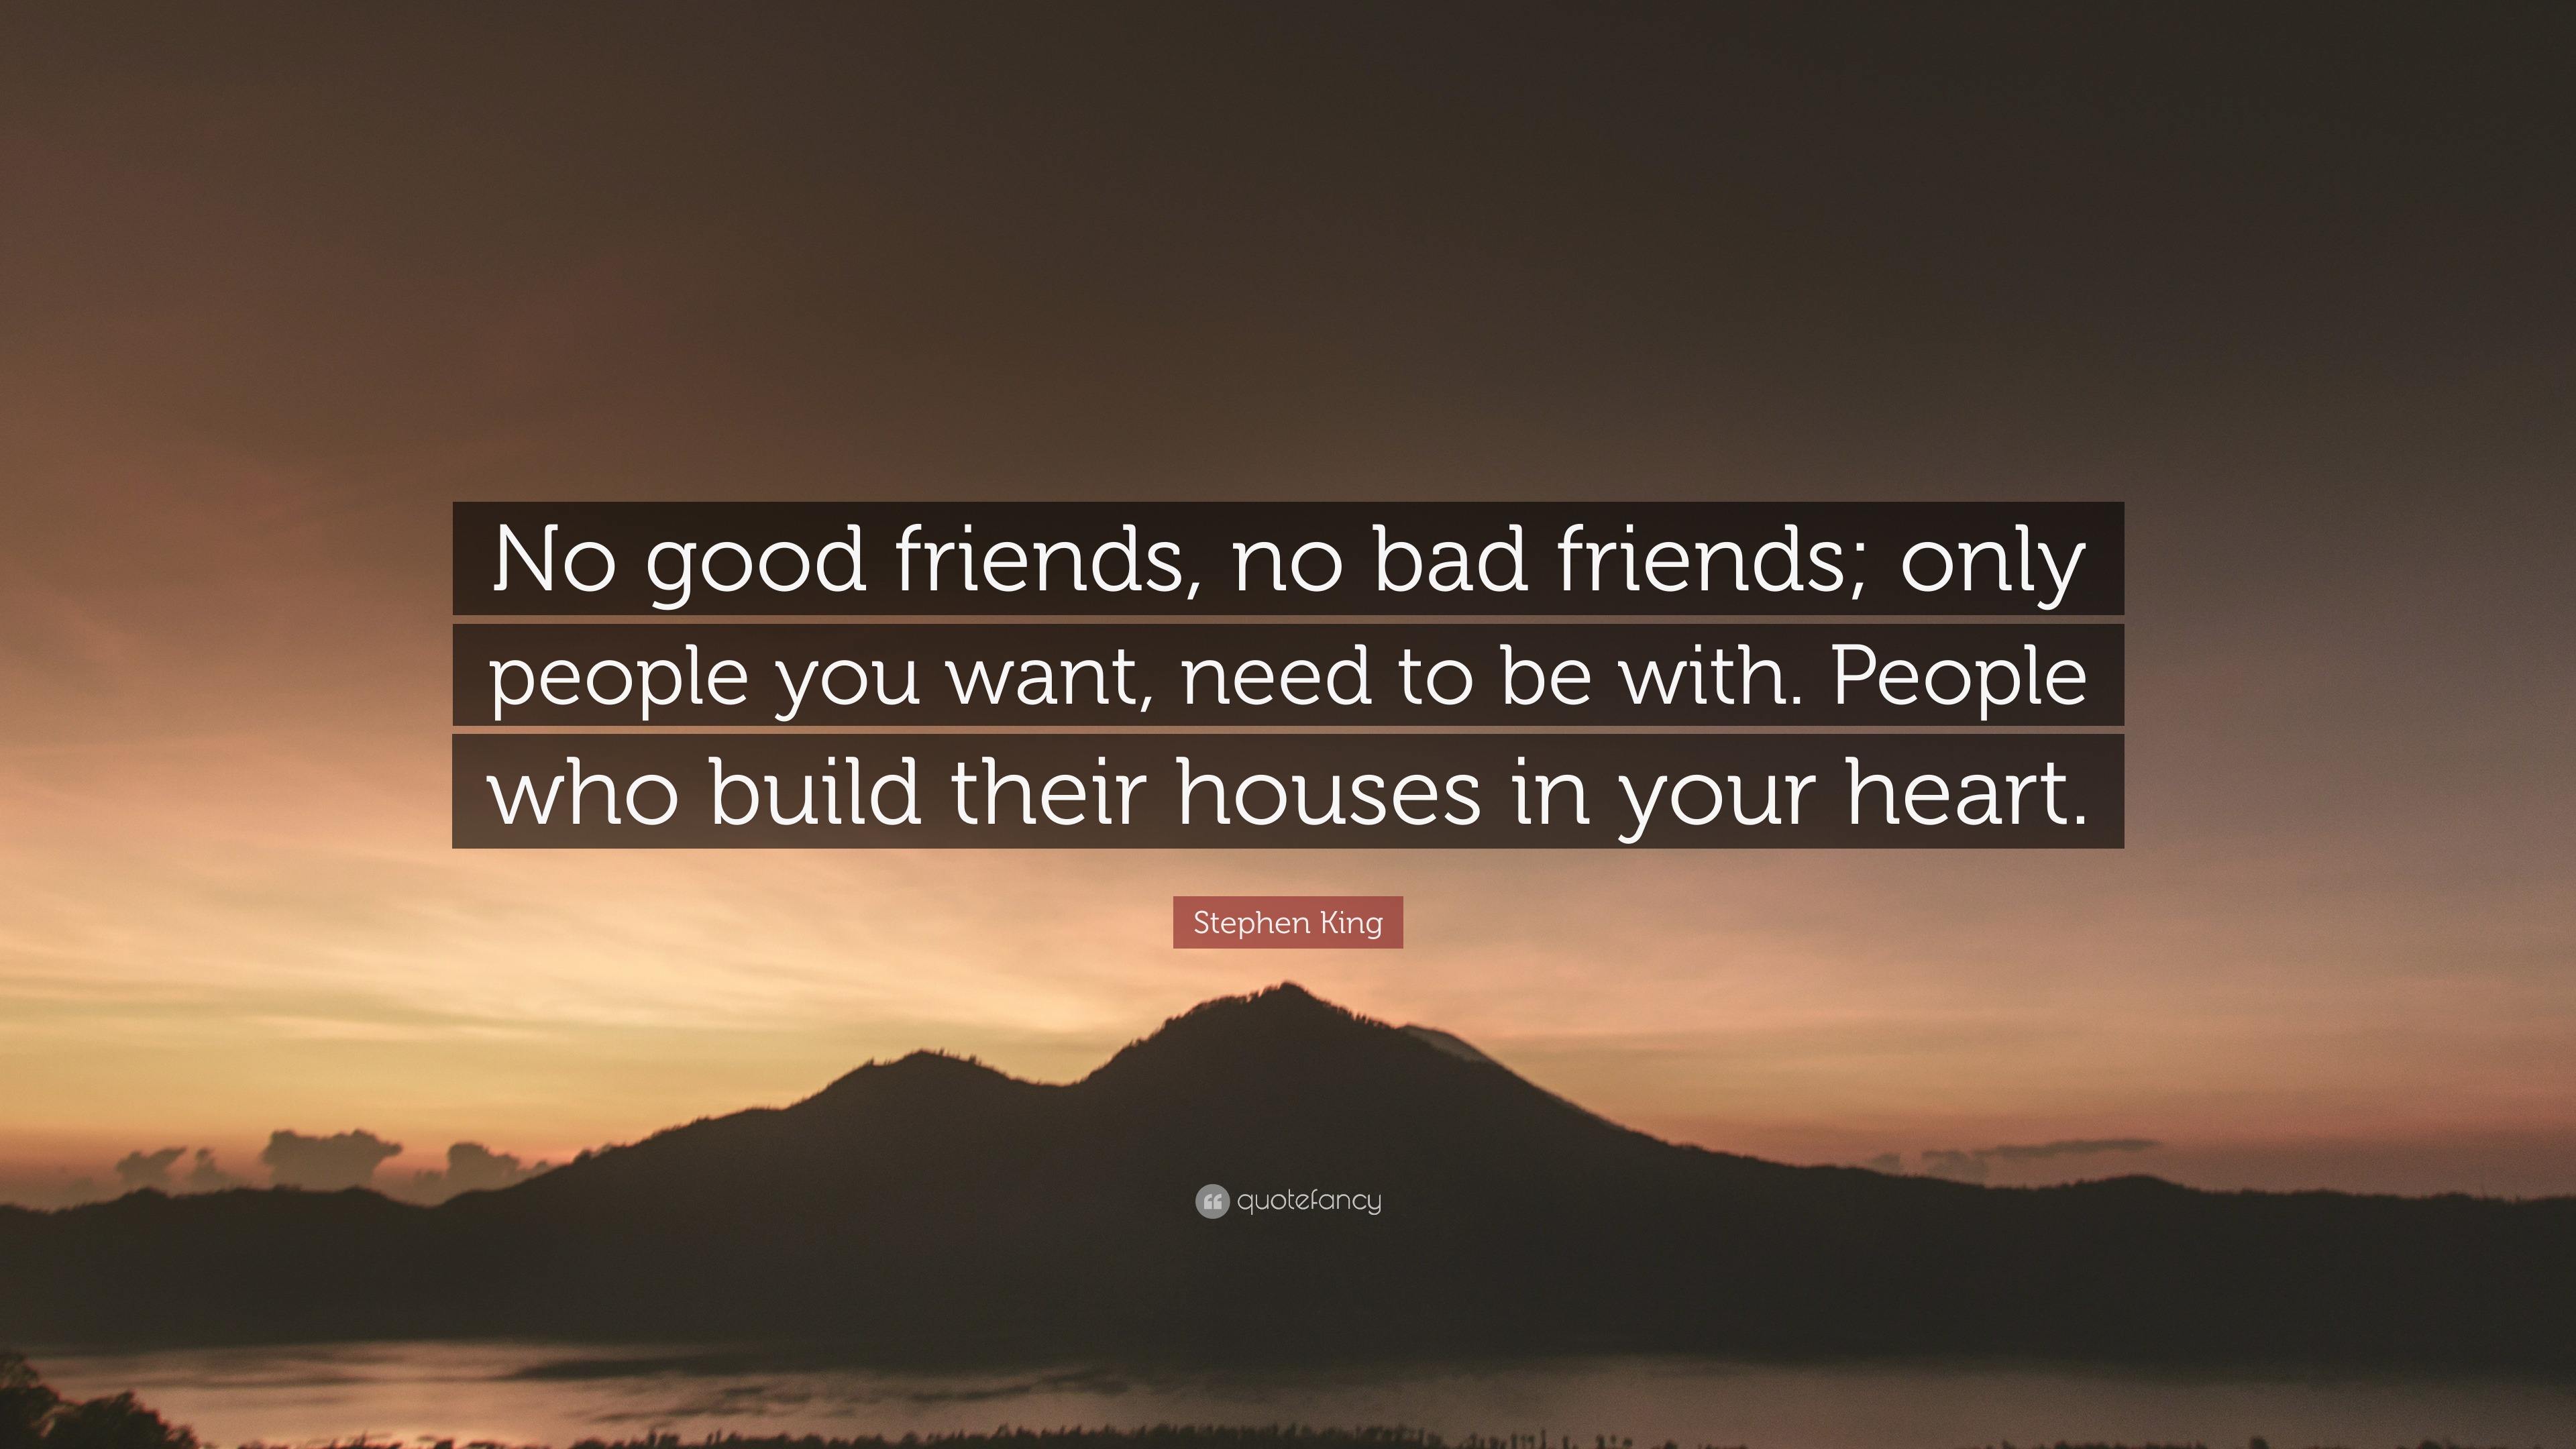 Stephen King Quote “No good friends, no bad friends; only